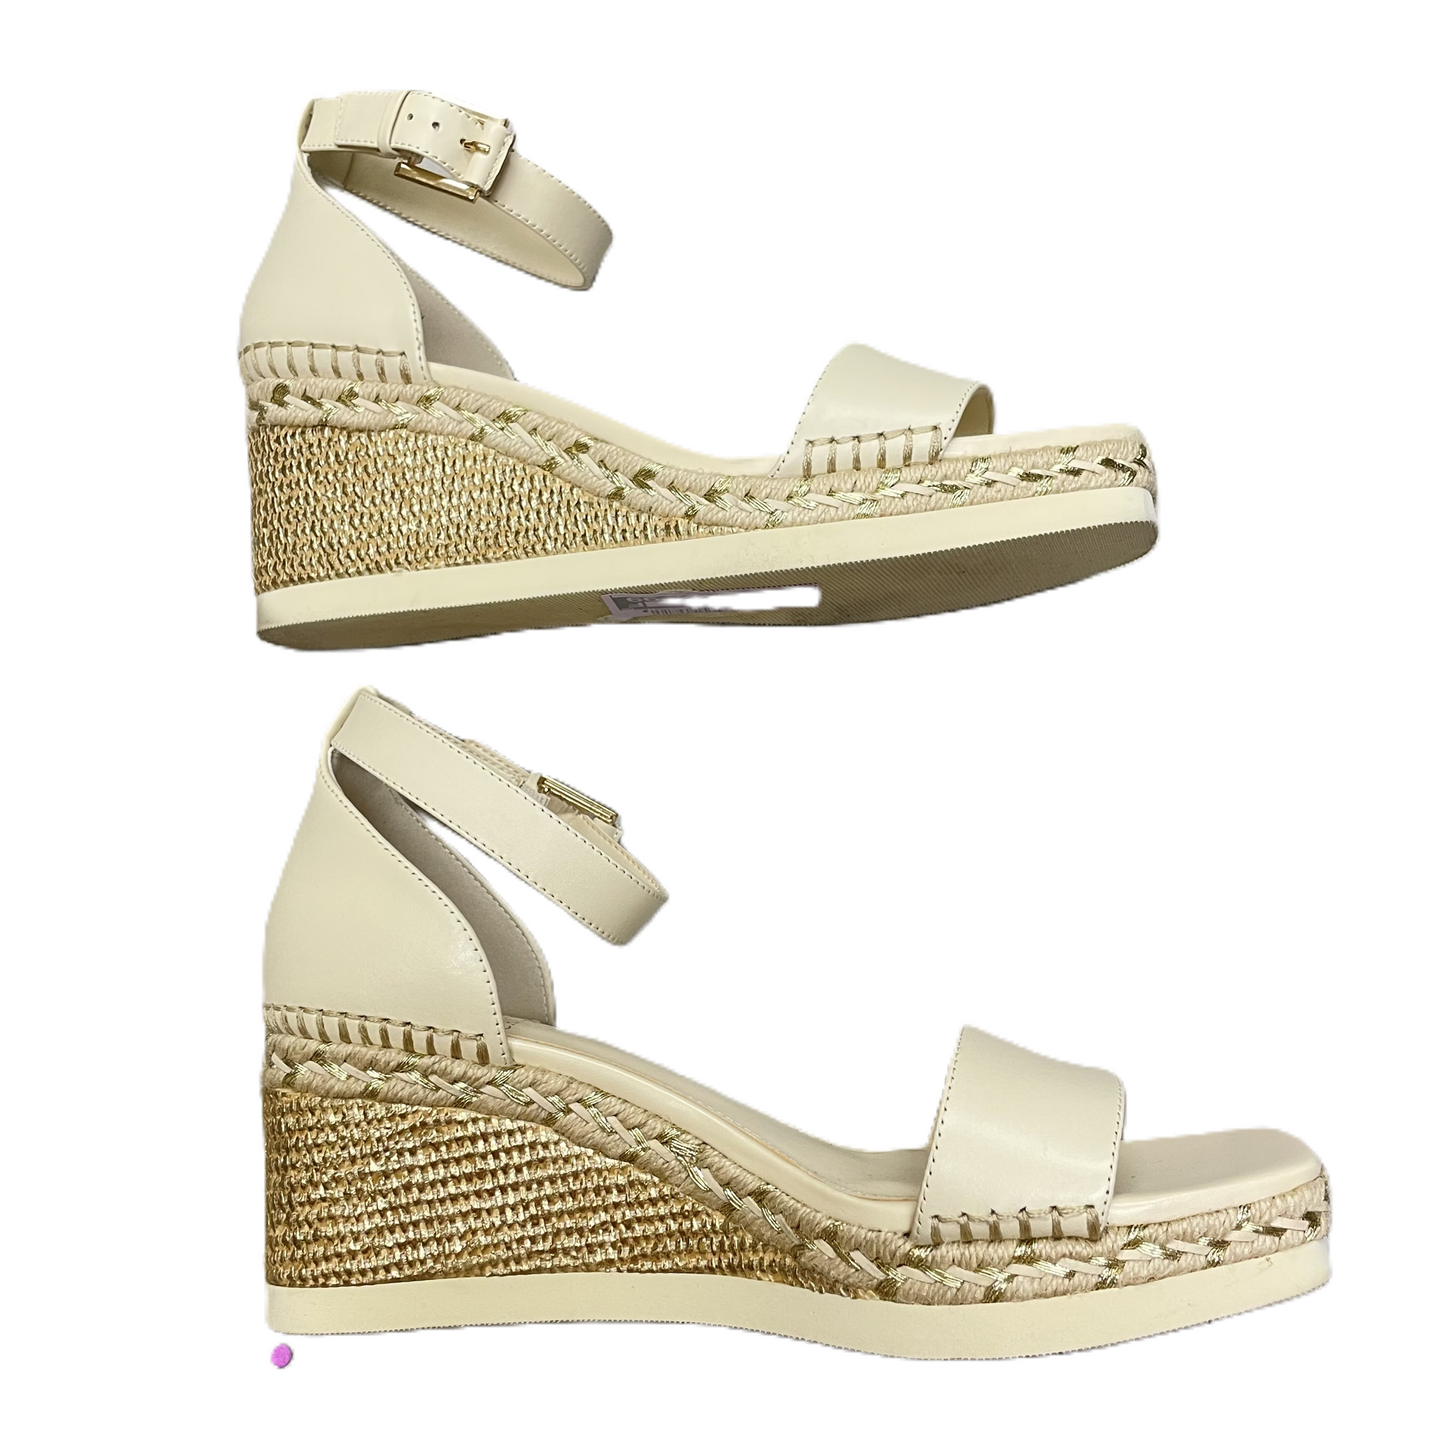 Cream Sandals Heels Wedge By Vince Camuto, Size: 8.5